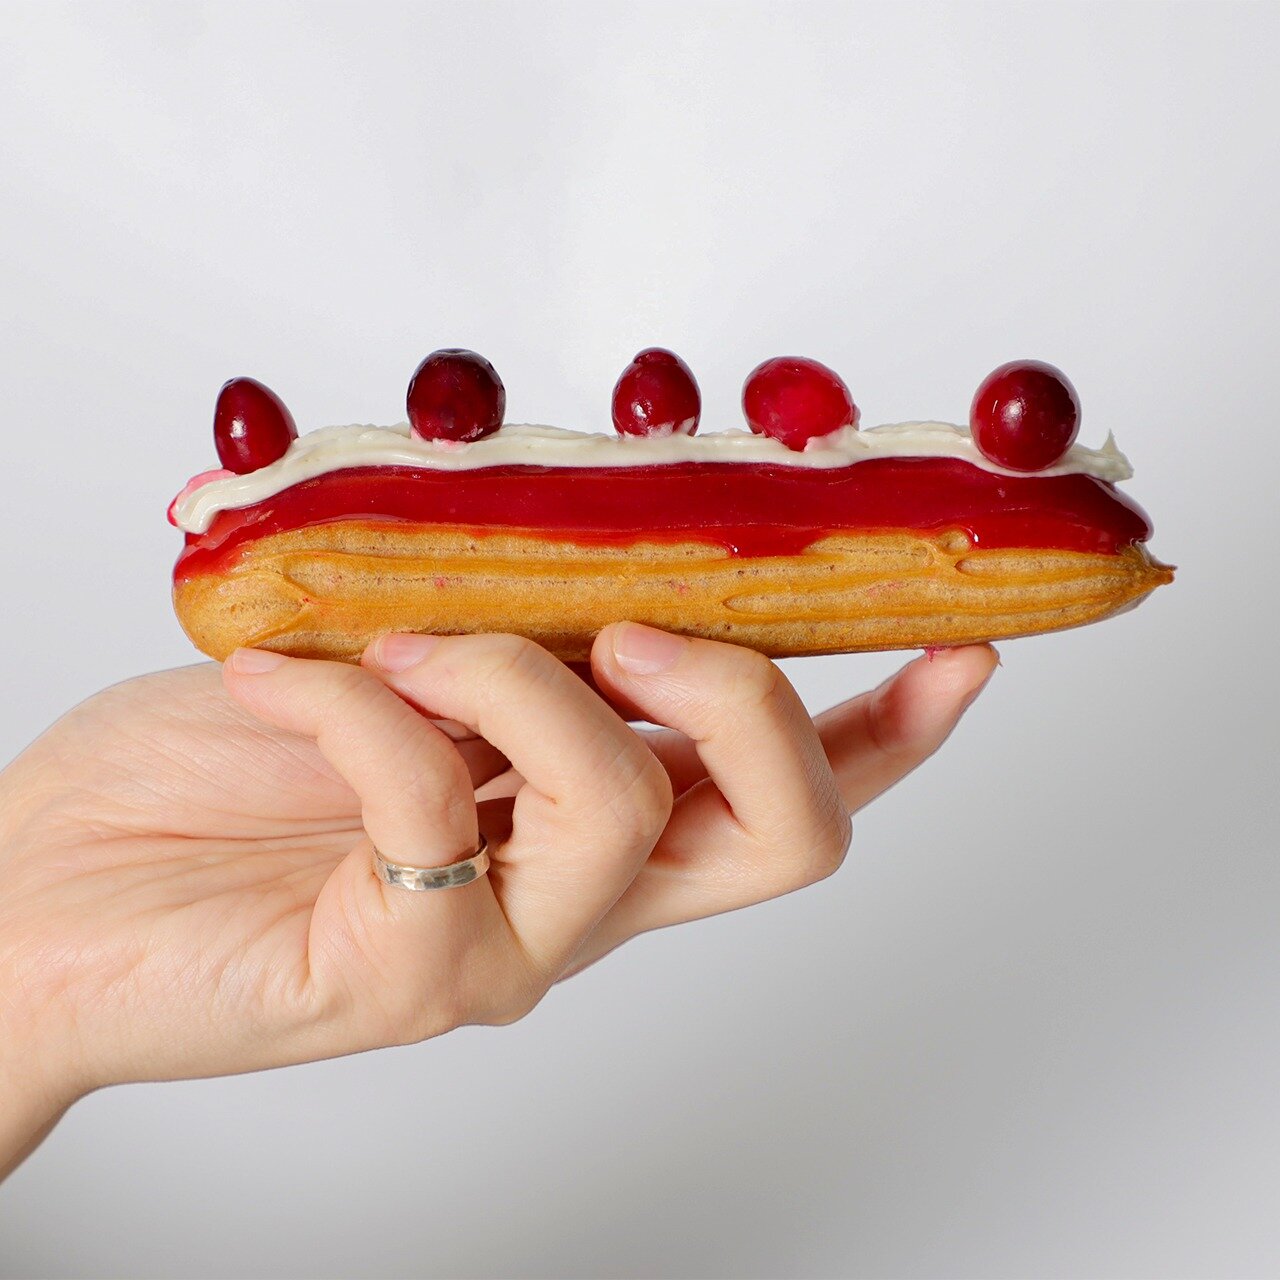 Very Cranberry
This beautiful dessert is filled with a creamy cranberry filling, topped with some whipped cream and cranberry fruits. Talk about a flavor explosion!

Wanna try it out? Contact us to get your free sample 📩

#&eacute;clair #afternoonte